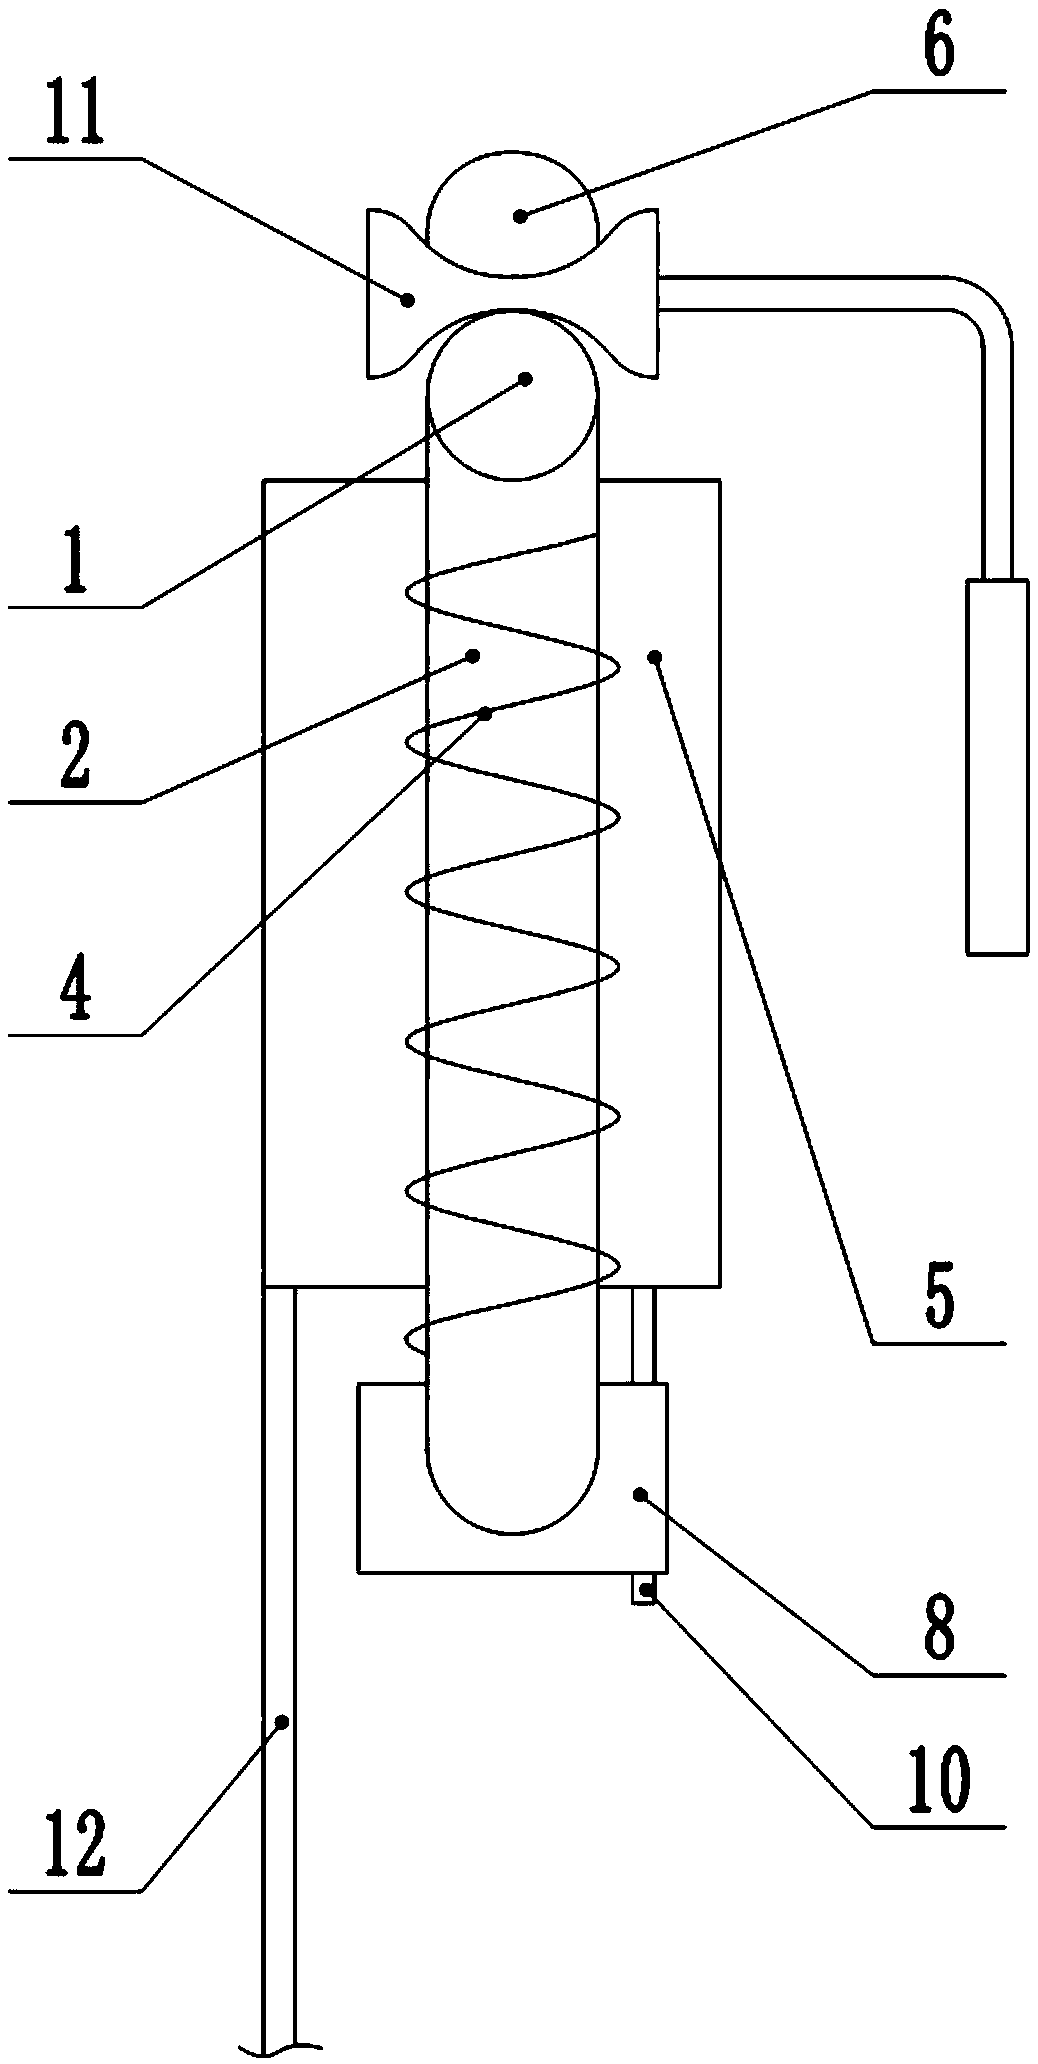 Hanging system guide rail